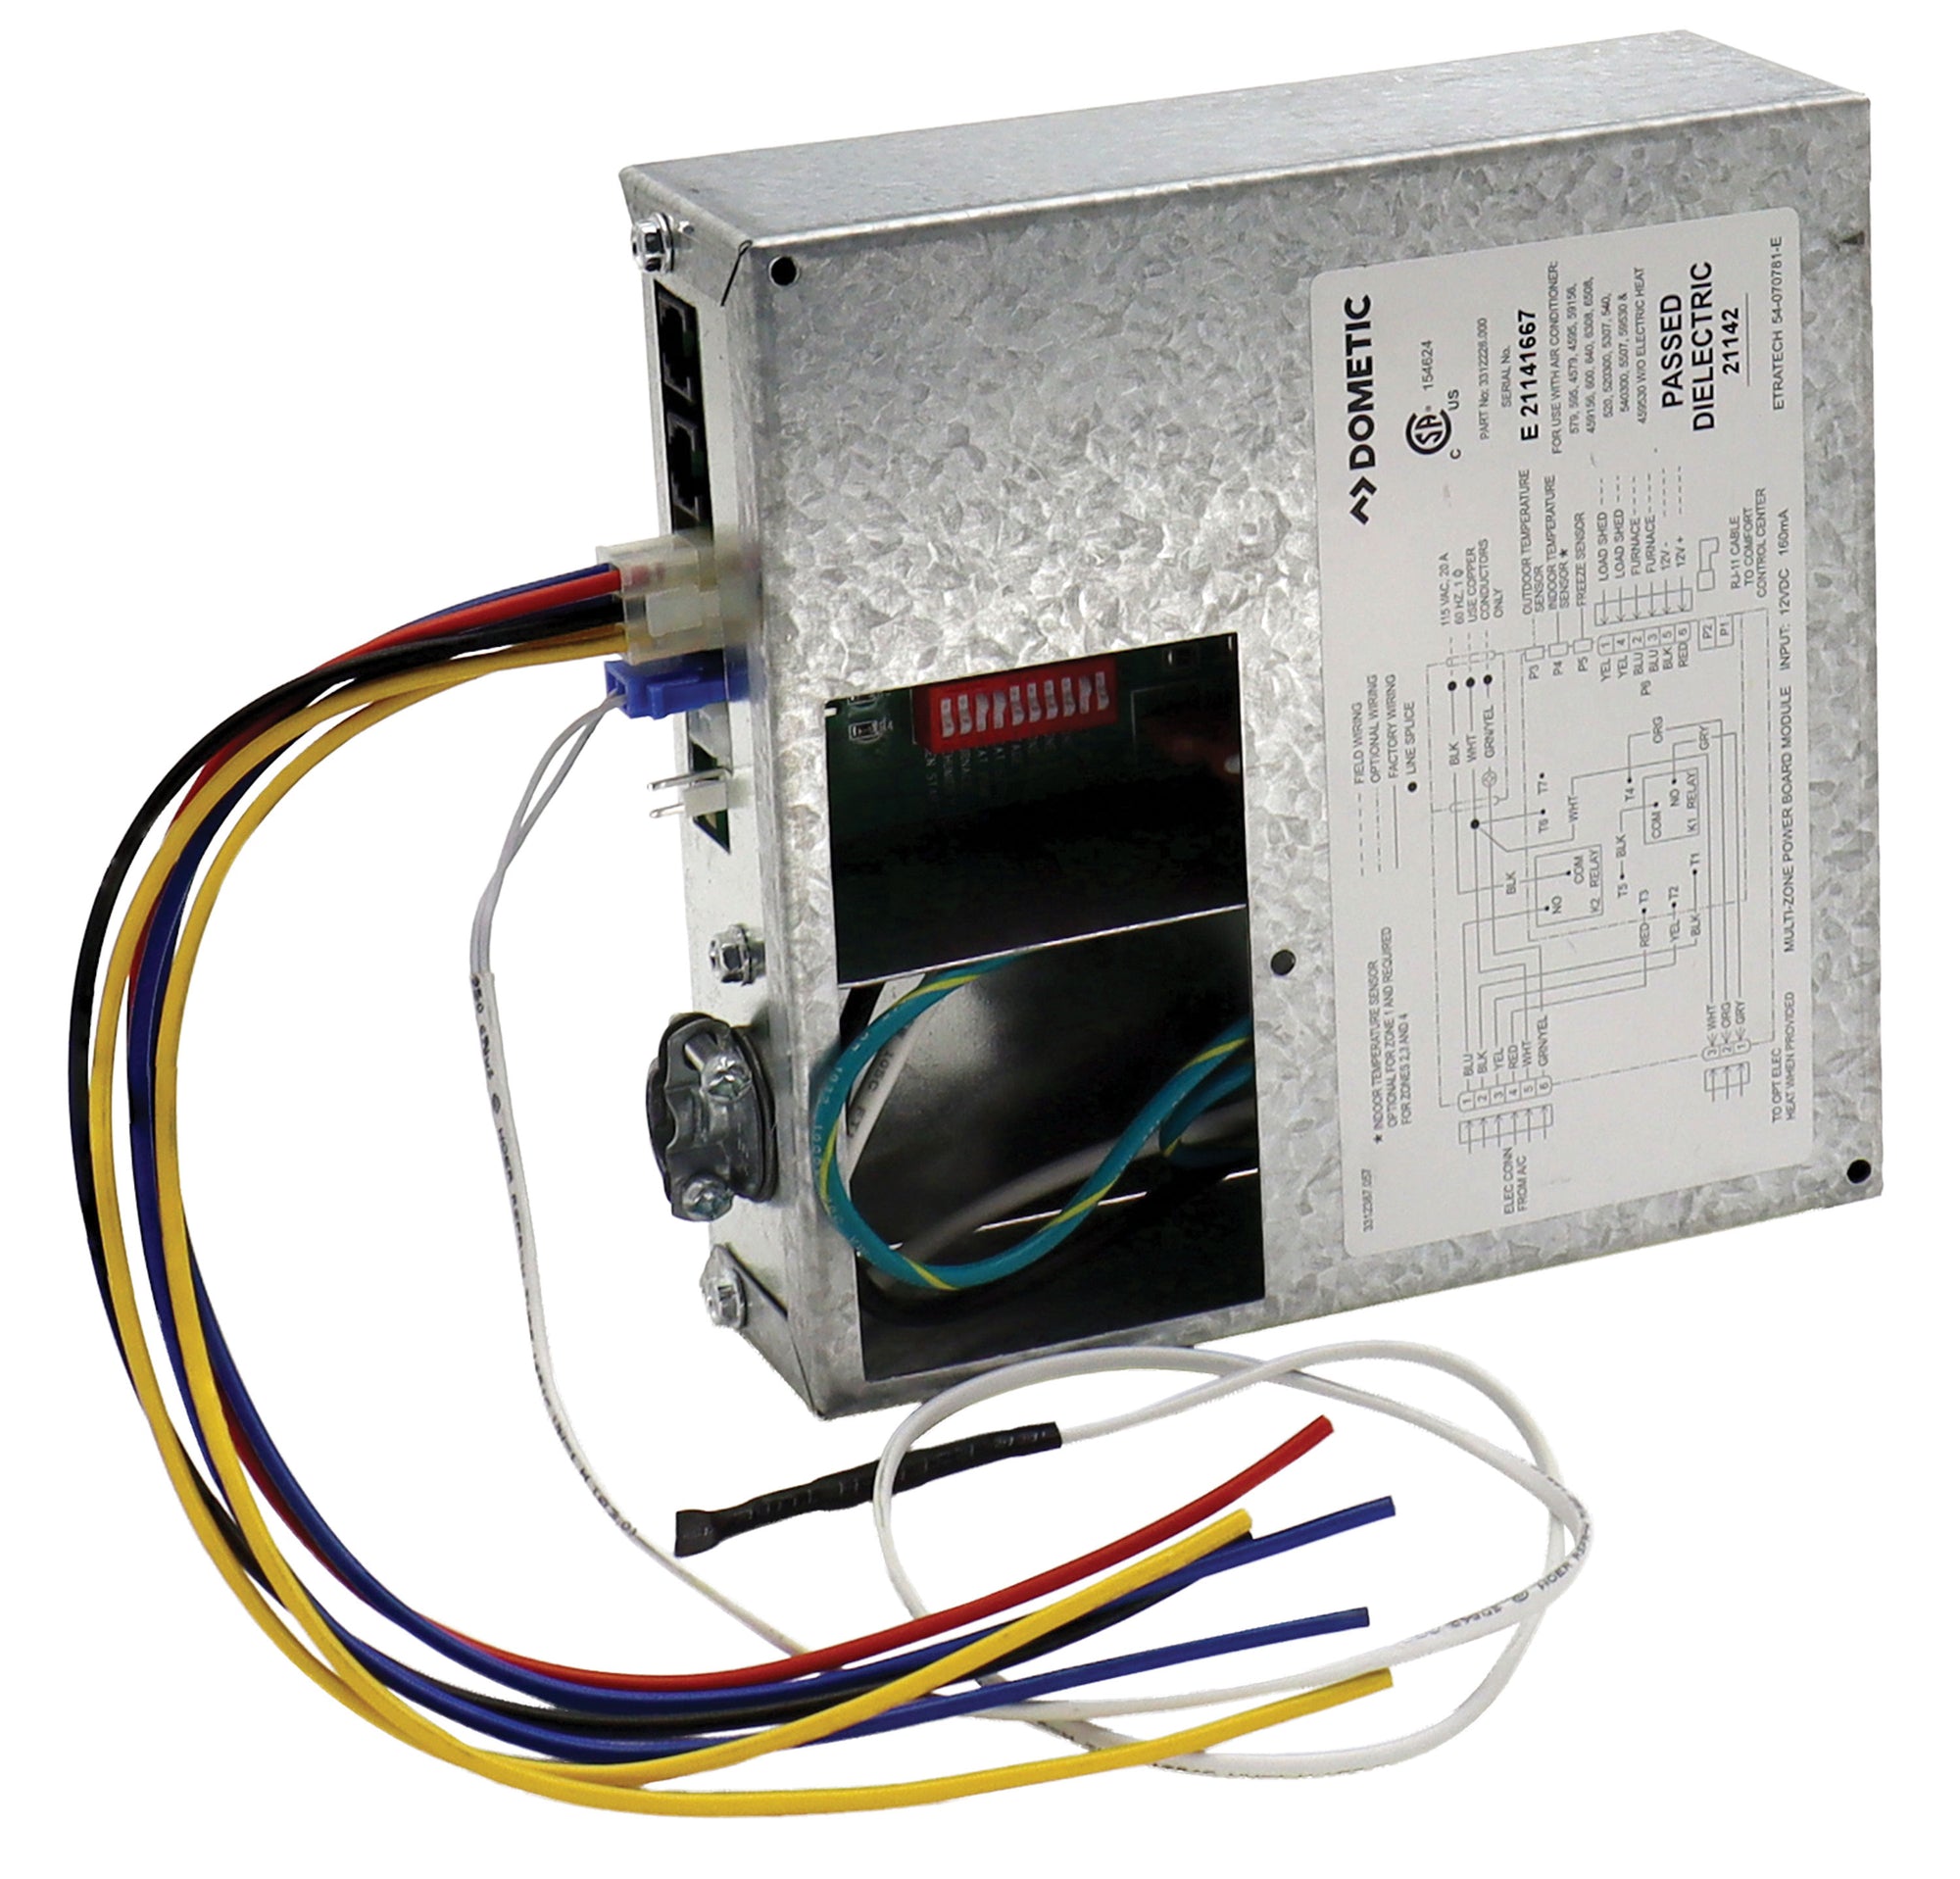 Dometic 3312020.000 Control Kit, Heat/Cool Relay Box for CCCII Thermostat